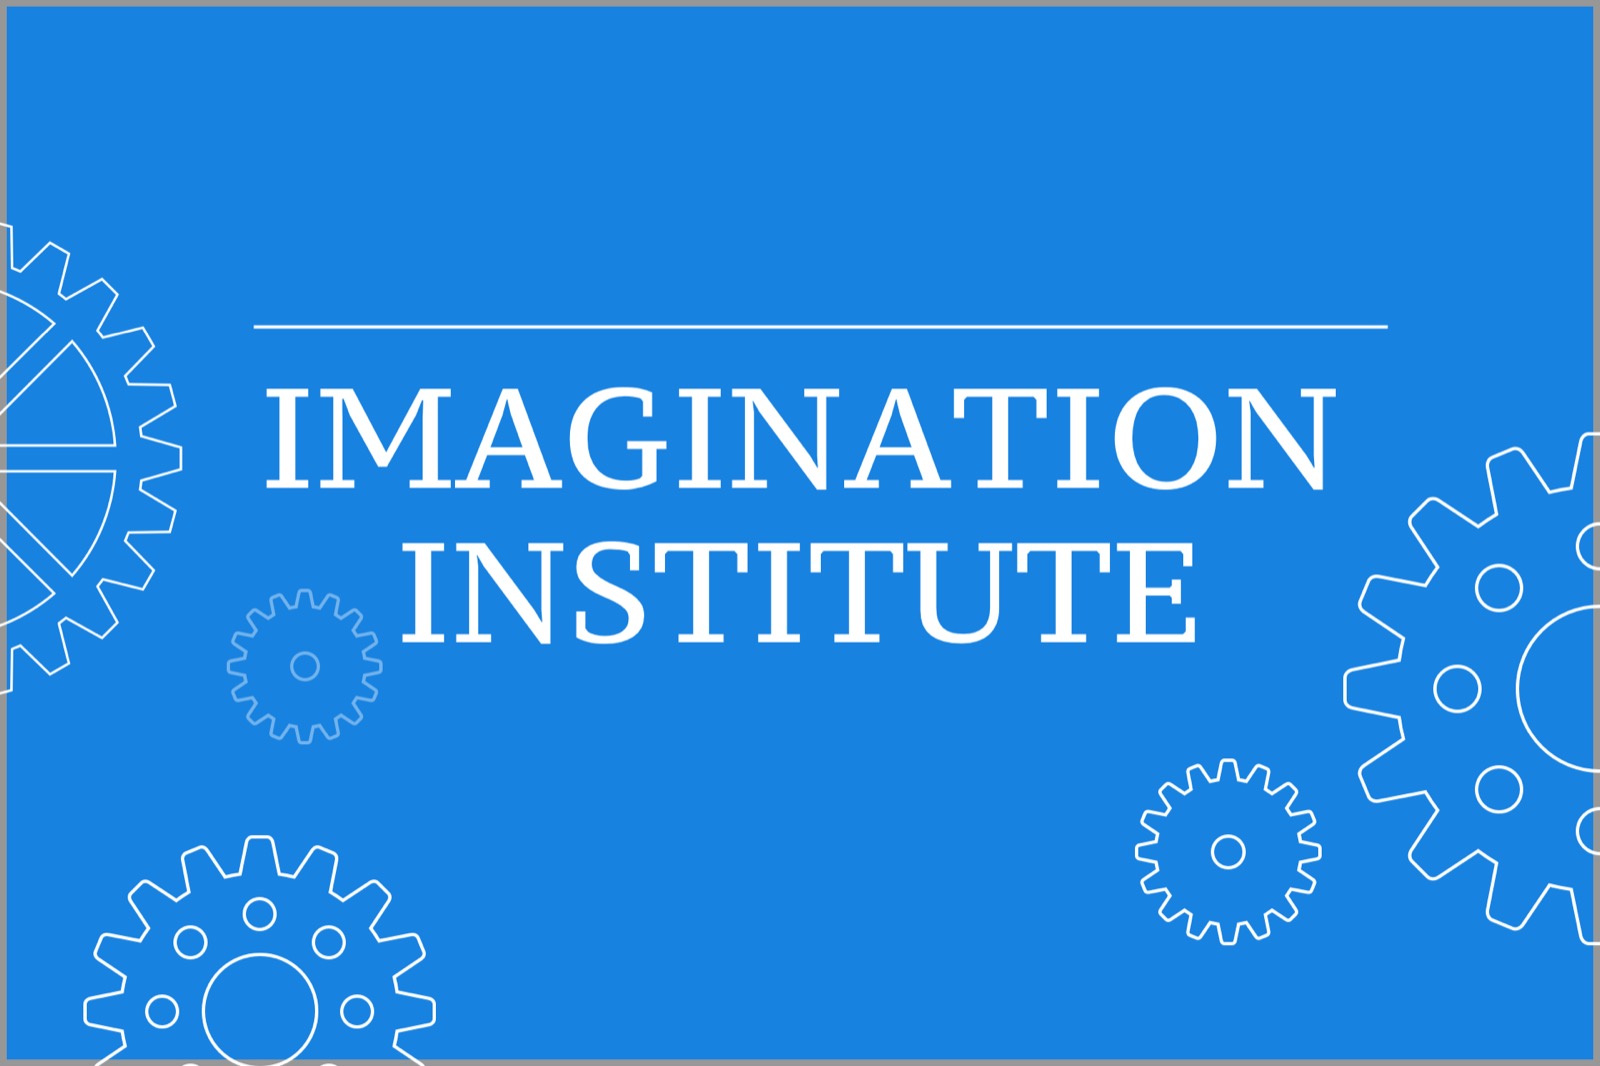 Imagination Institute text in white with a light blue background with great icons in the background.